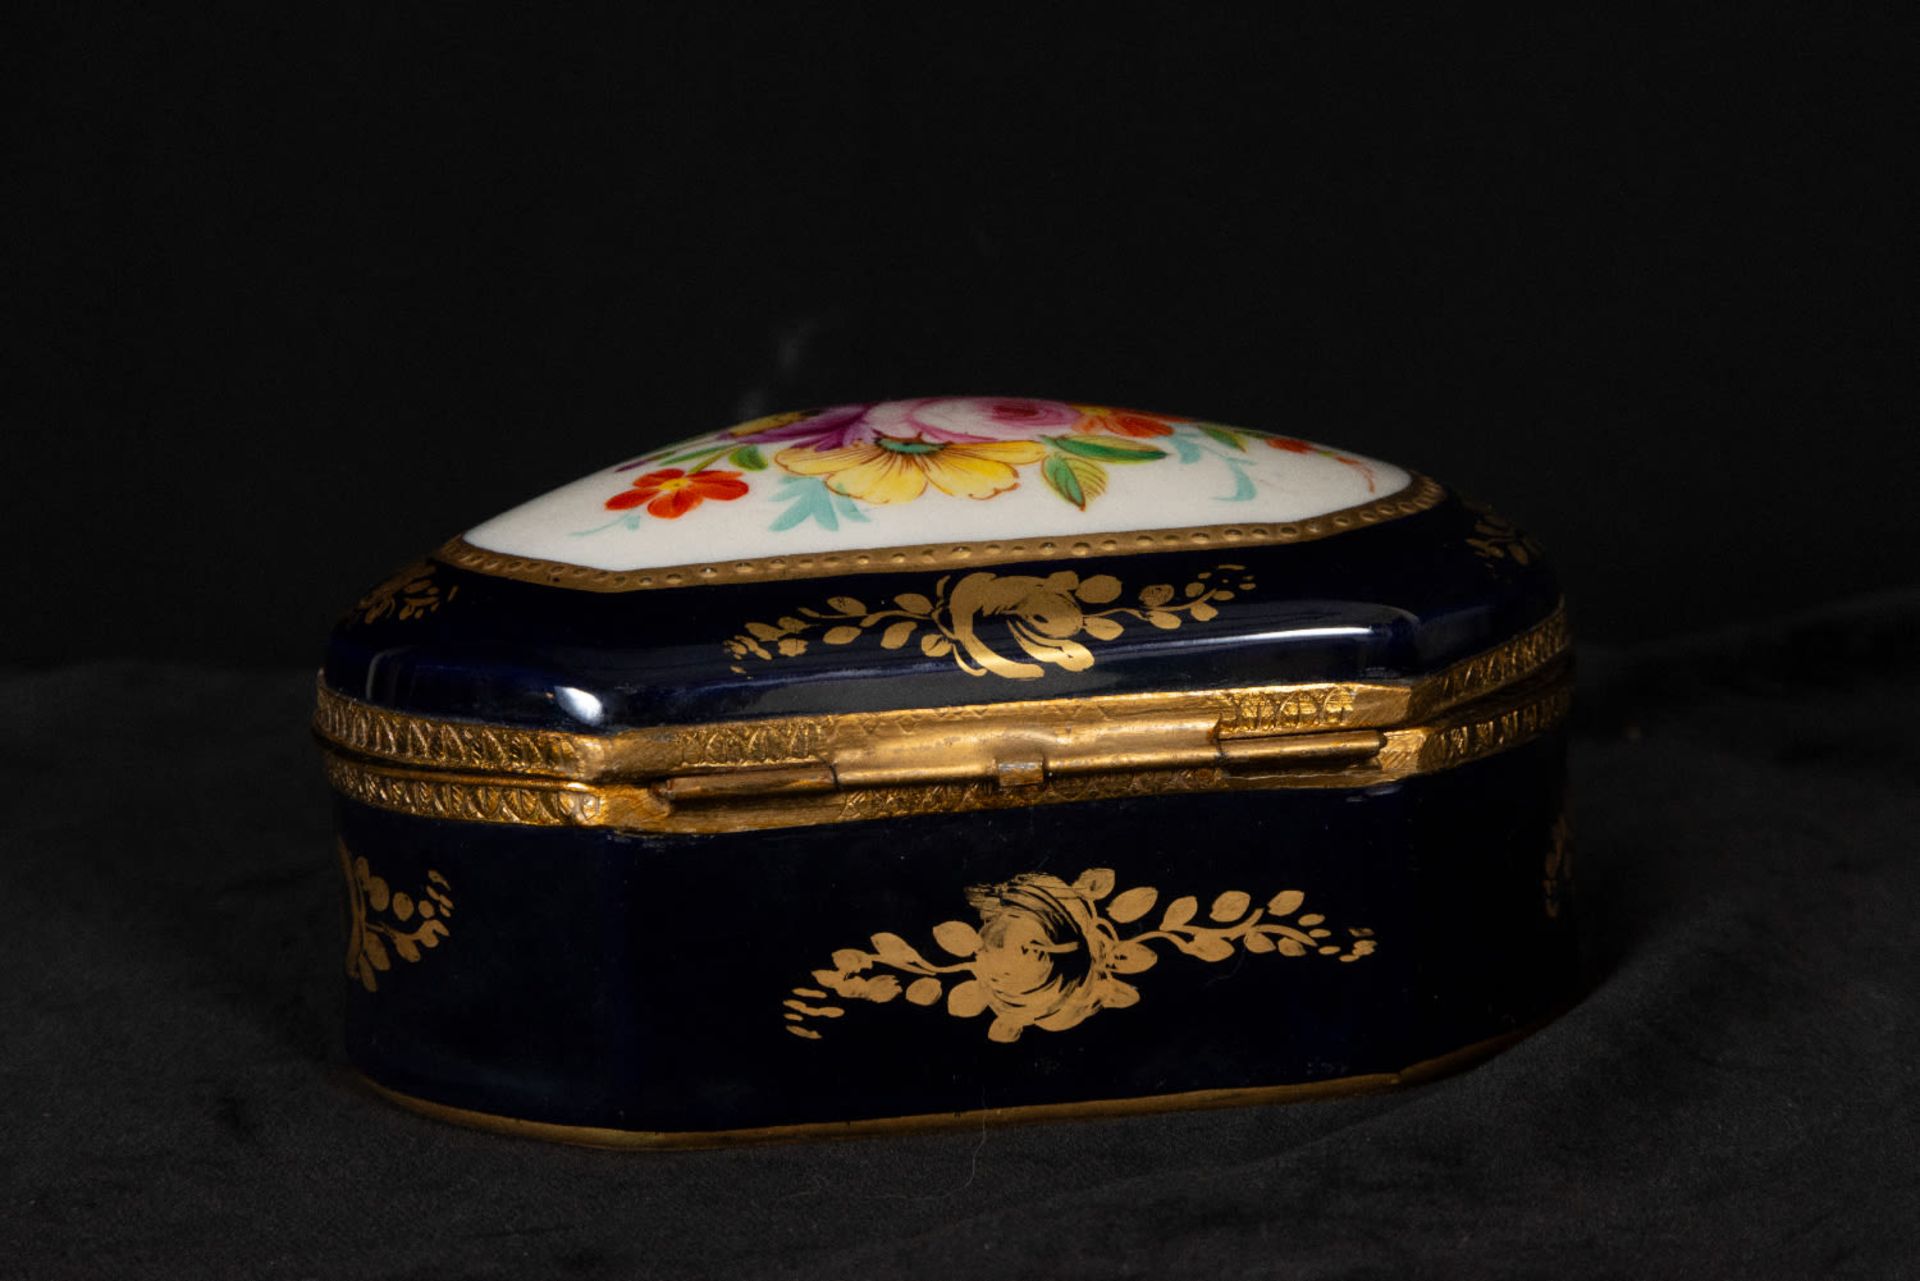 Pair of Sèvres porcelain dressing table jewelry boxes and porcelain swan, 19th century - Image 5 of 10